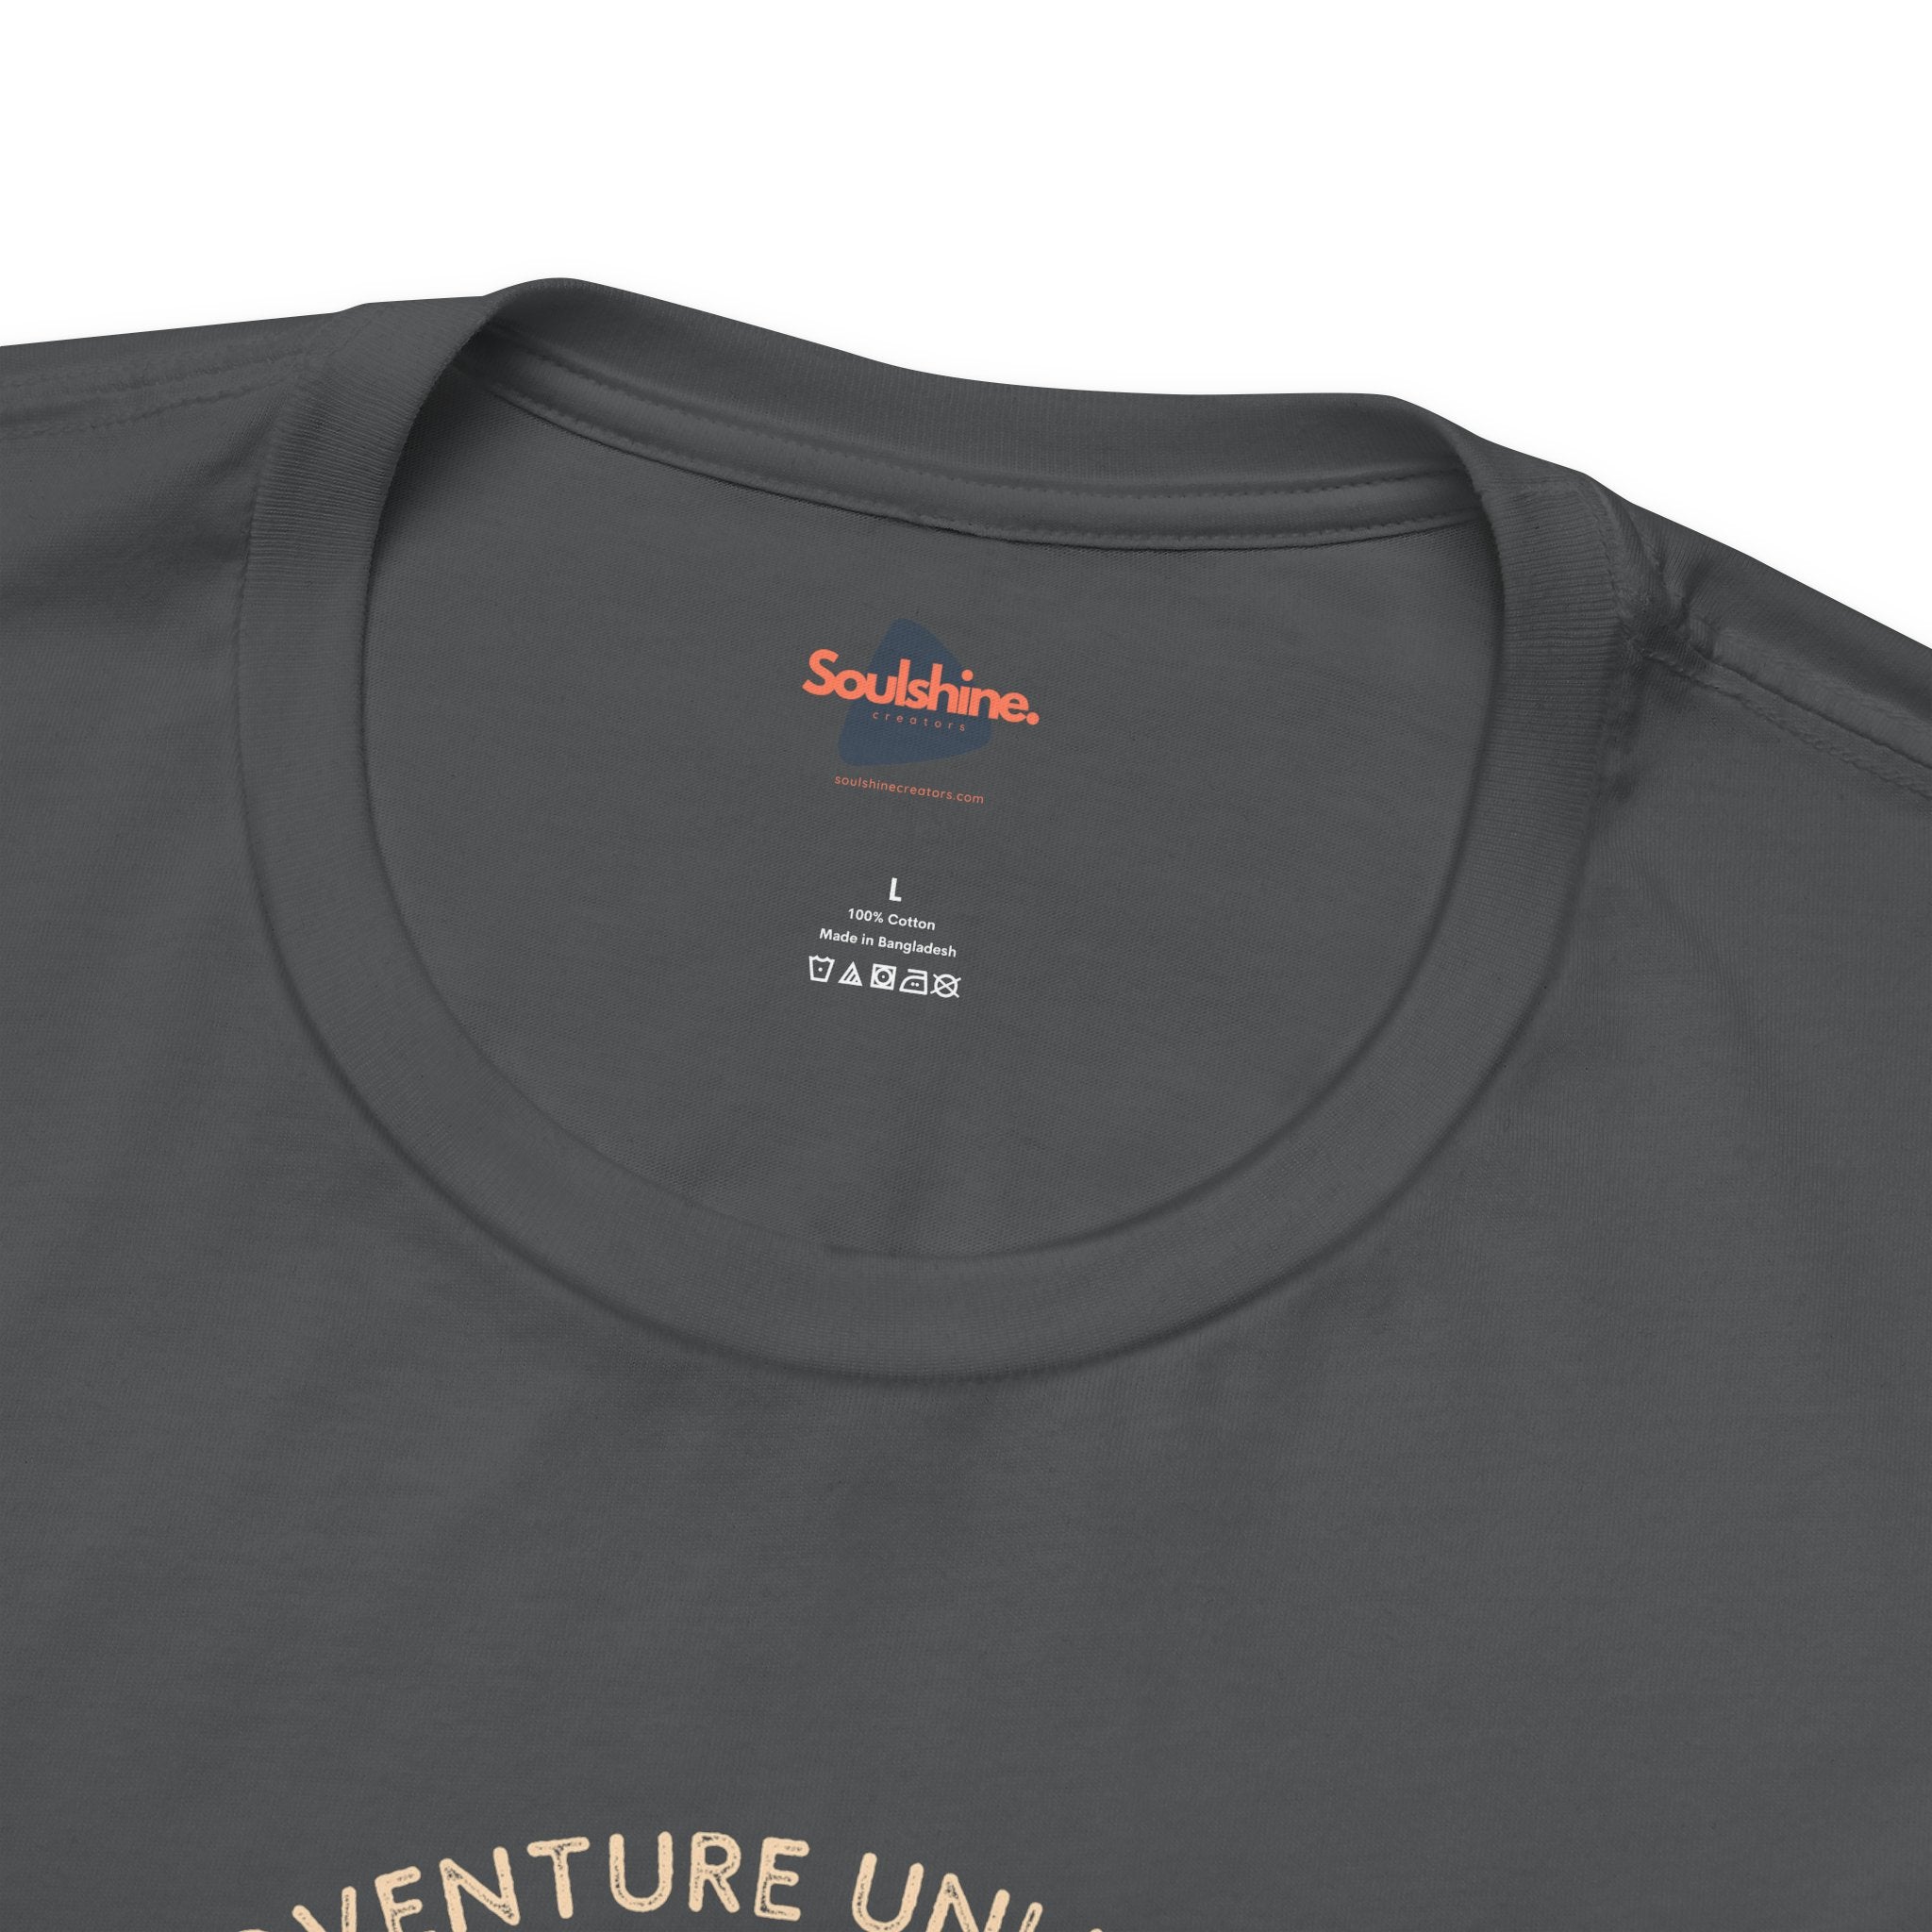 Adventure Unlimited charcoal grey t-shirt with printed text on the back